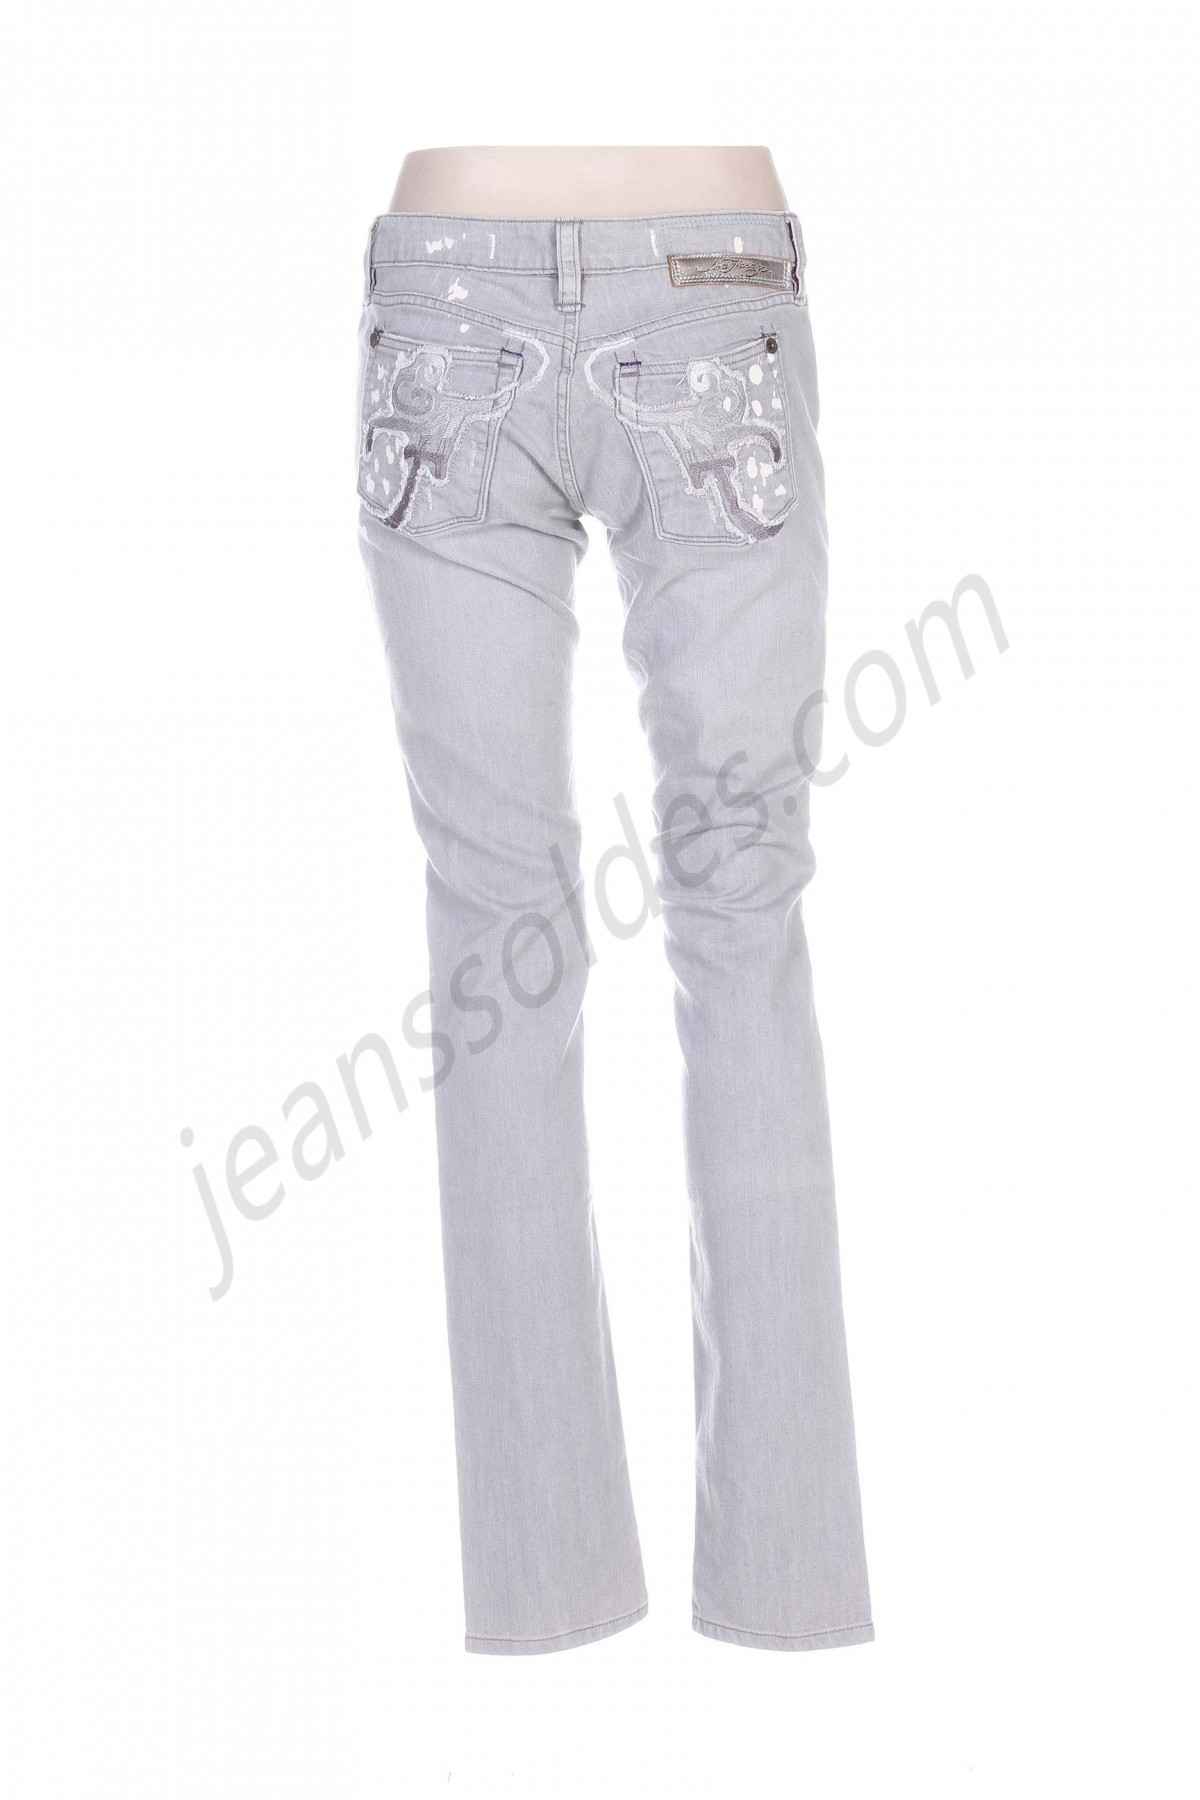 ed hardy-Jeans coupe slim prix d’amis - -1